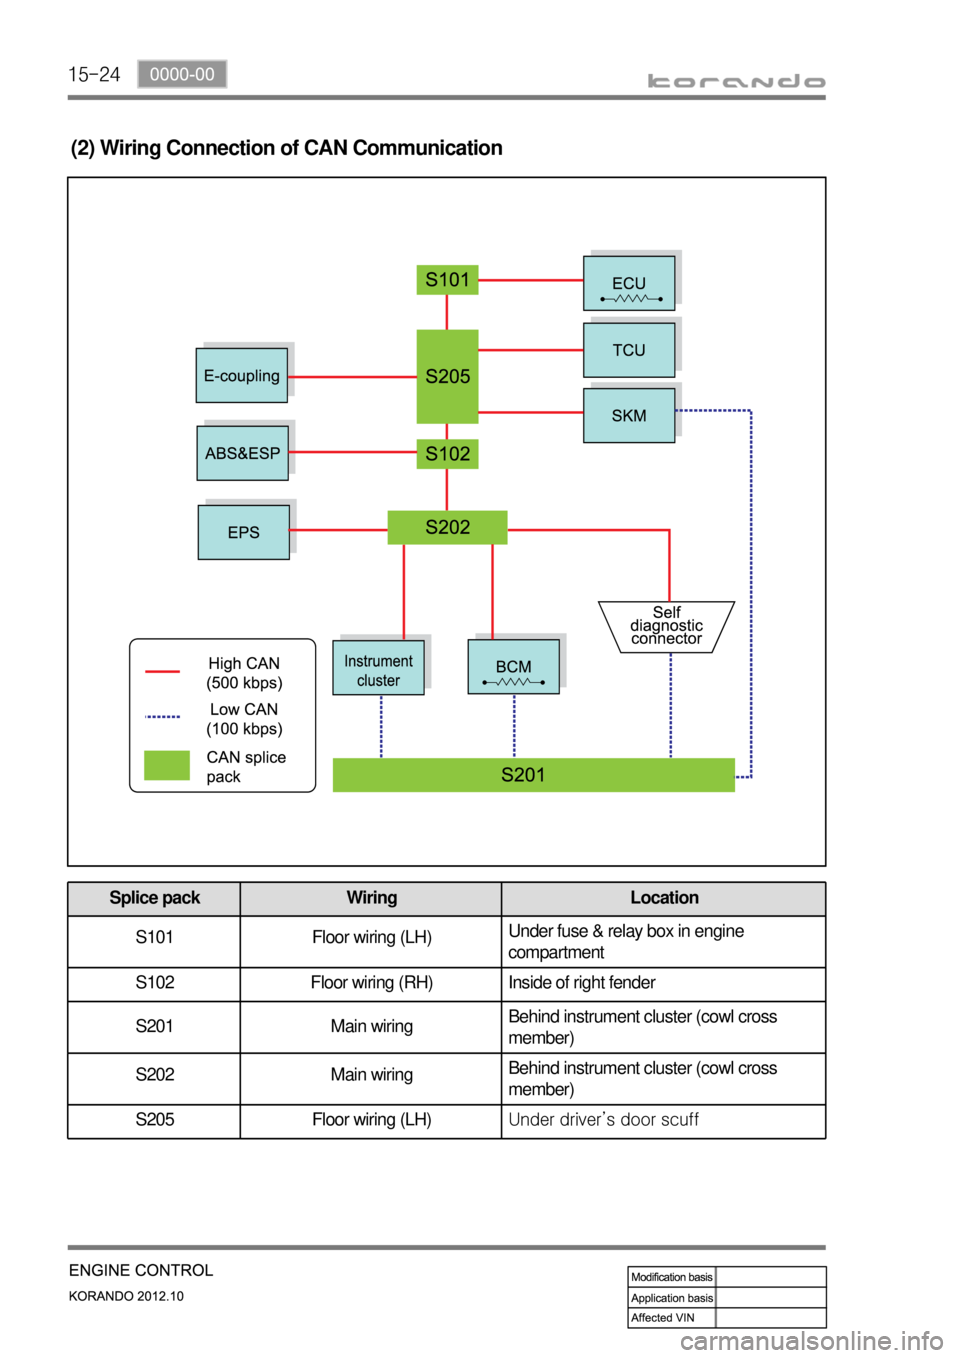 SSANGYONG KORANDO 2012  Service Manual 15-24
(2) Wiring Connection of CAN Communication
Splice pack Wiring Location
S101 Floor wiring (LH)Under fuse & relay box in engine 
compartment
S102 Floor wiring (RH) Inside of right fender
S201 Main